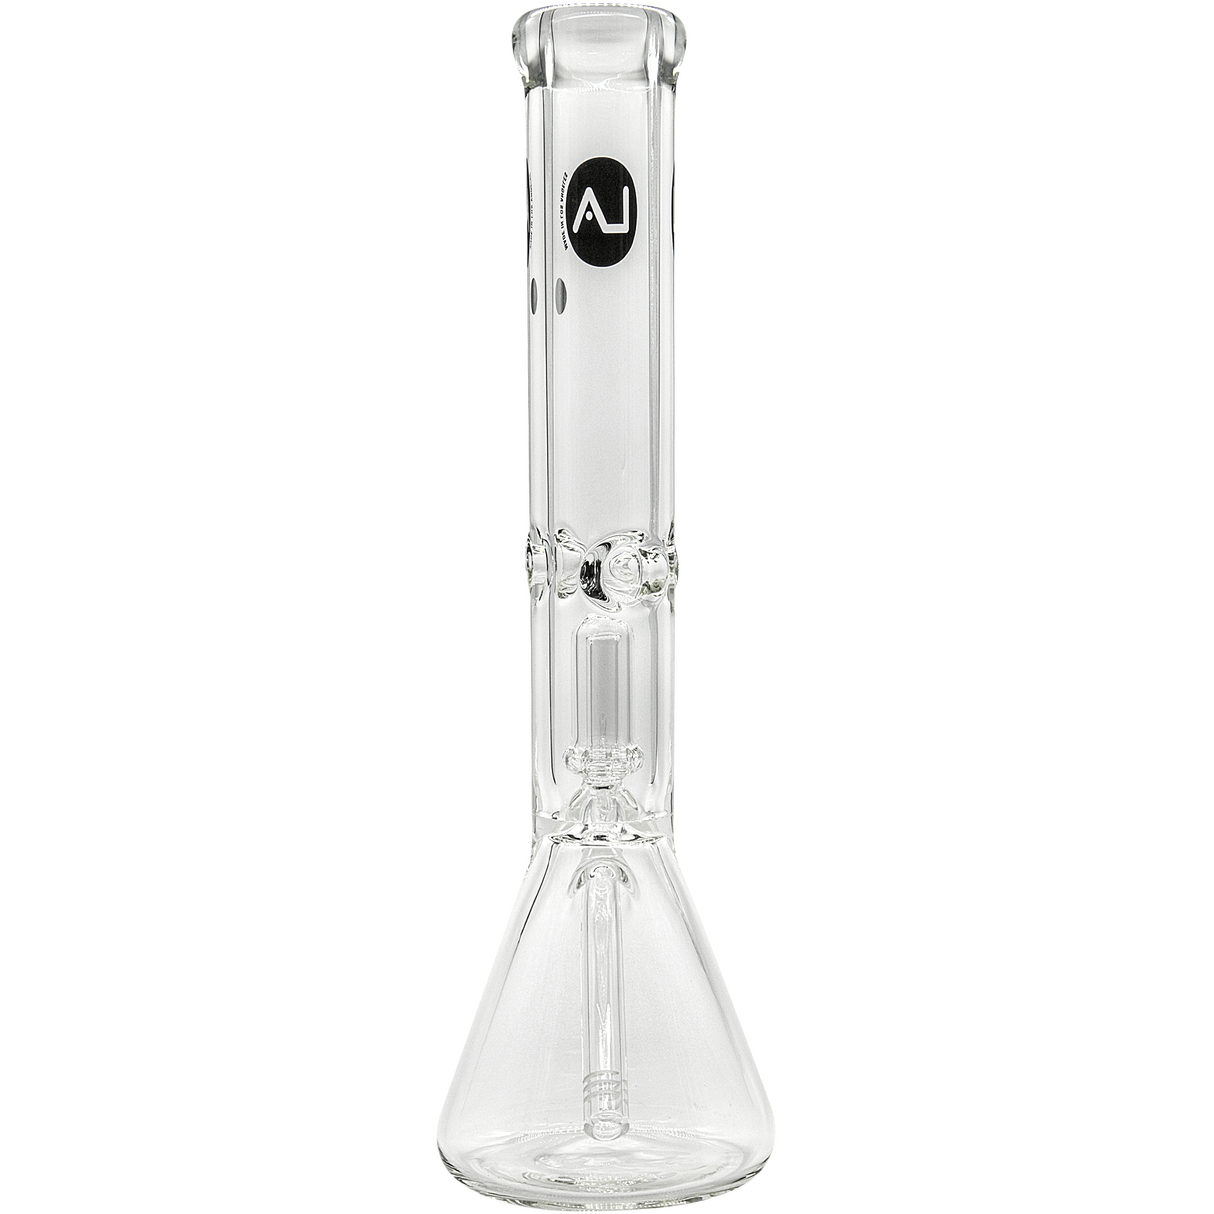 LA Pipes "King Bong" 9mm Thick Beaker Bong with Showerhead Percolator, Front View